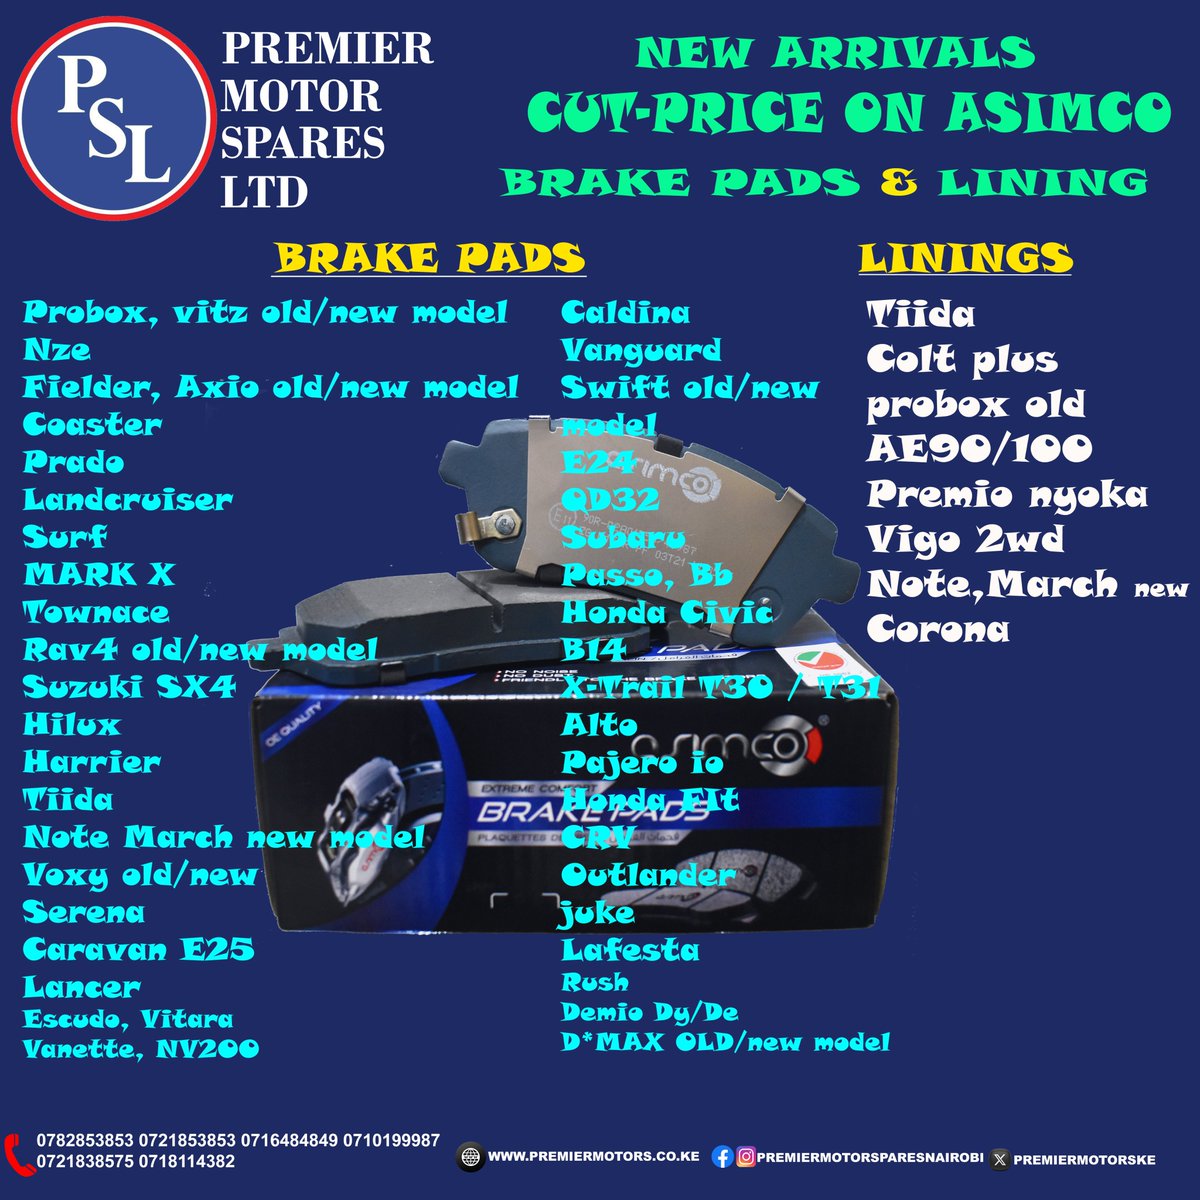 Arrivals on original Asimco brake pads and linings with the best prices in the market. Call us or visit our shops at kirinyaga road nairobi. Quality is our promise. #premiermotorspares #brakepads Fernandes Barasa Corona Mary Moraa Big Sean Peter Salasya Taiwan China Ruto DSTV